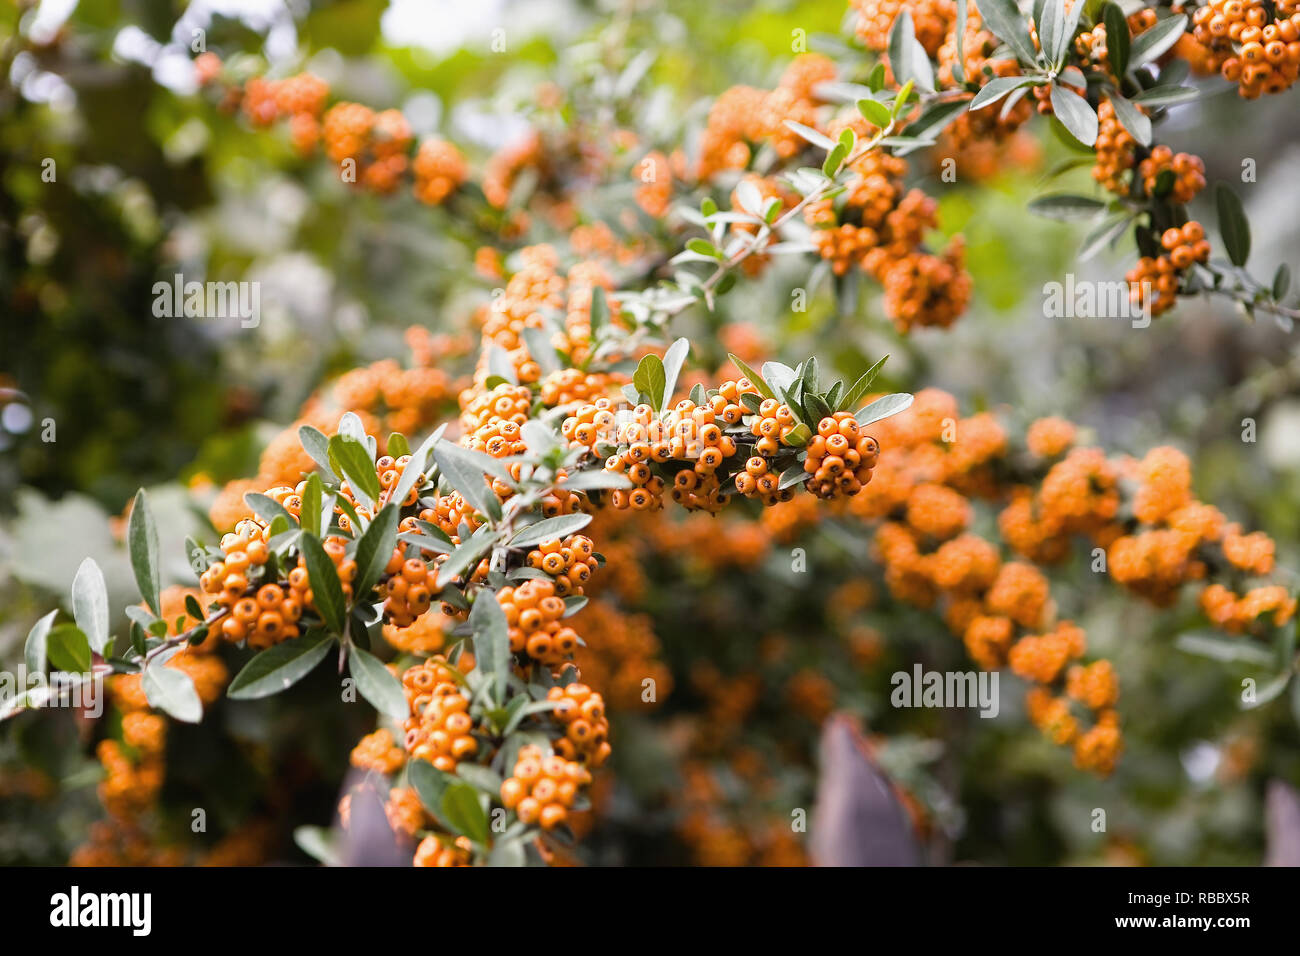 Sea-buckthorn fruits on a branch close-up. Nature. Stock Photo